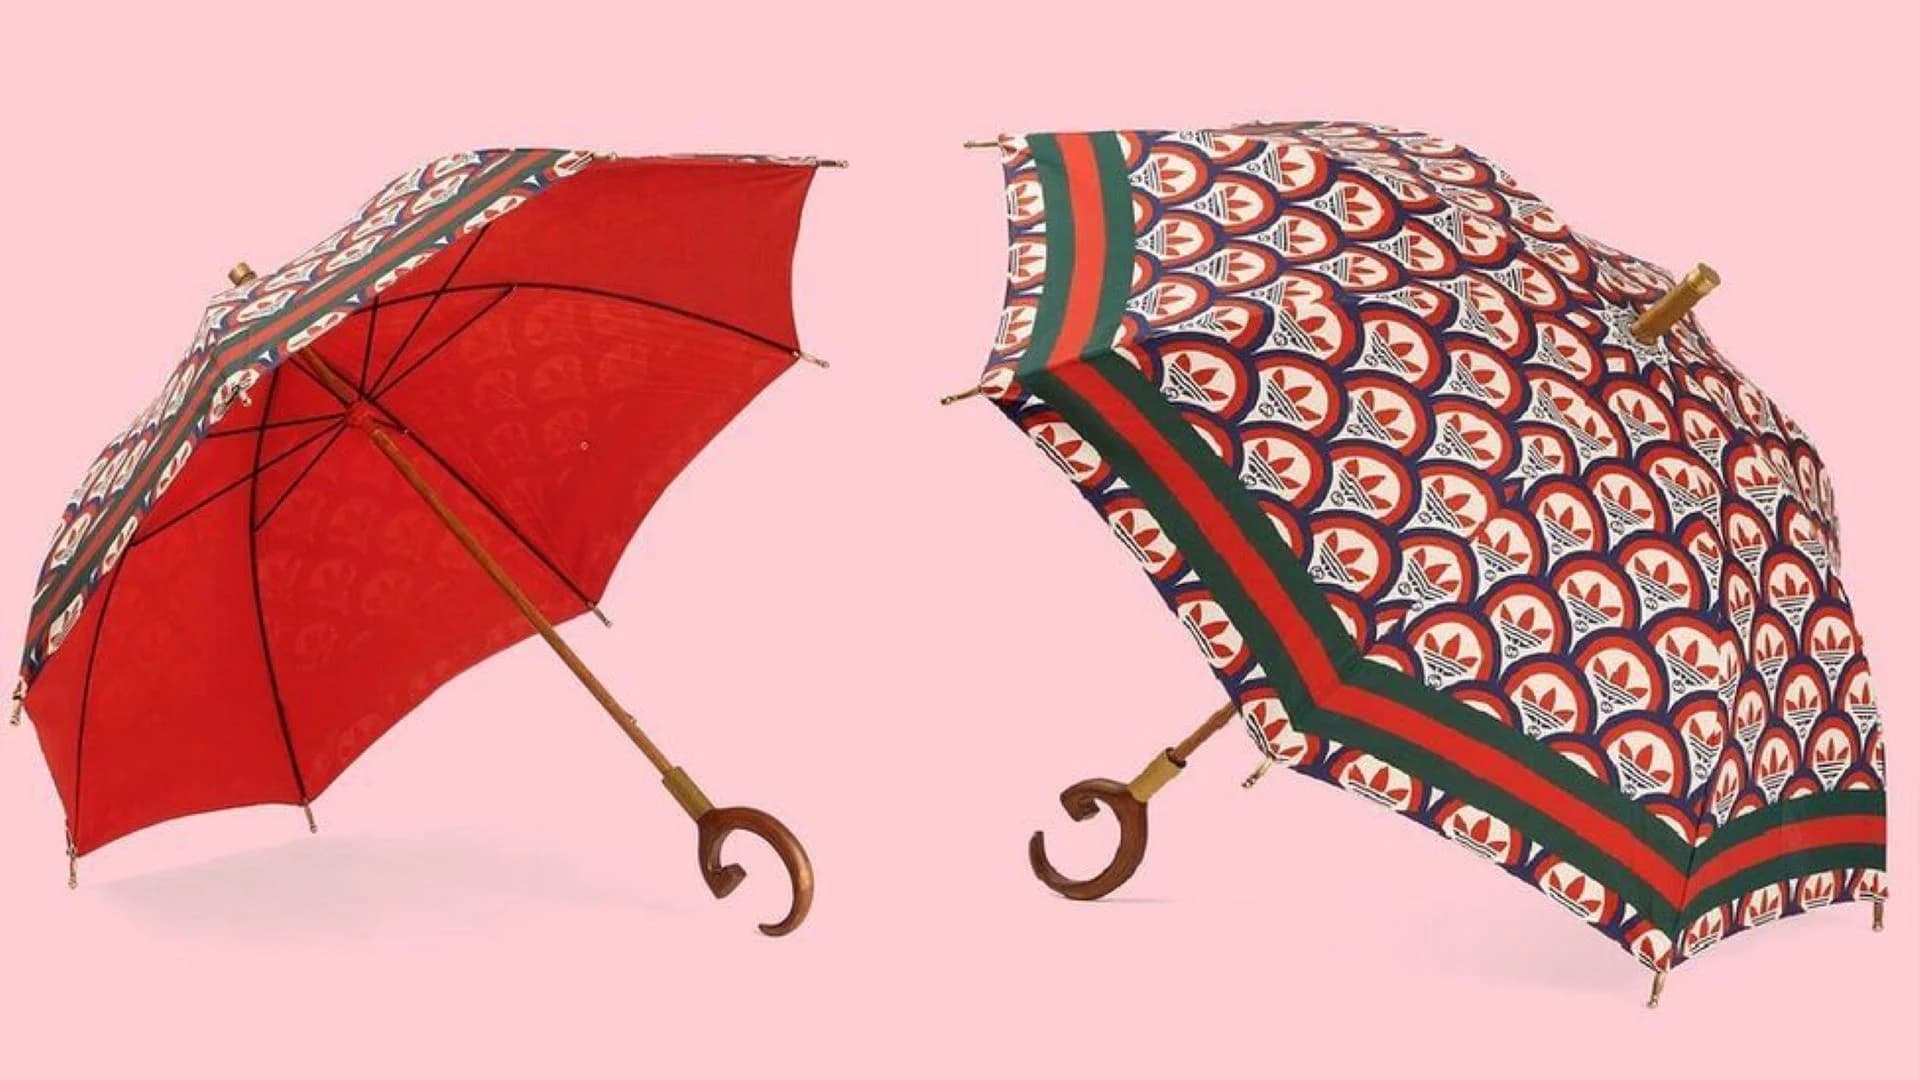 What's Hot! Adidas and Gucci team up to make $1,290 umbrella that's not waterproof